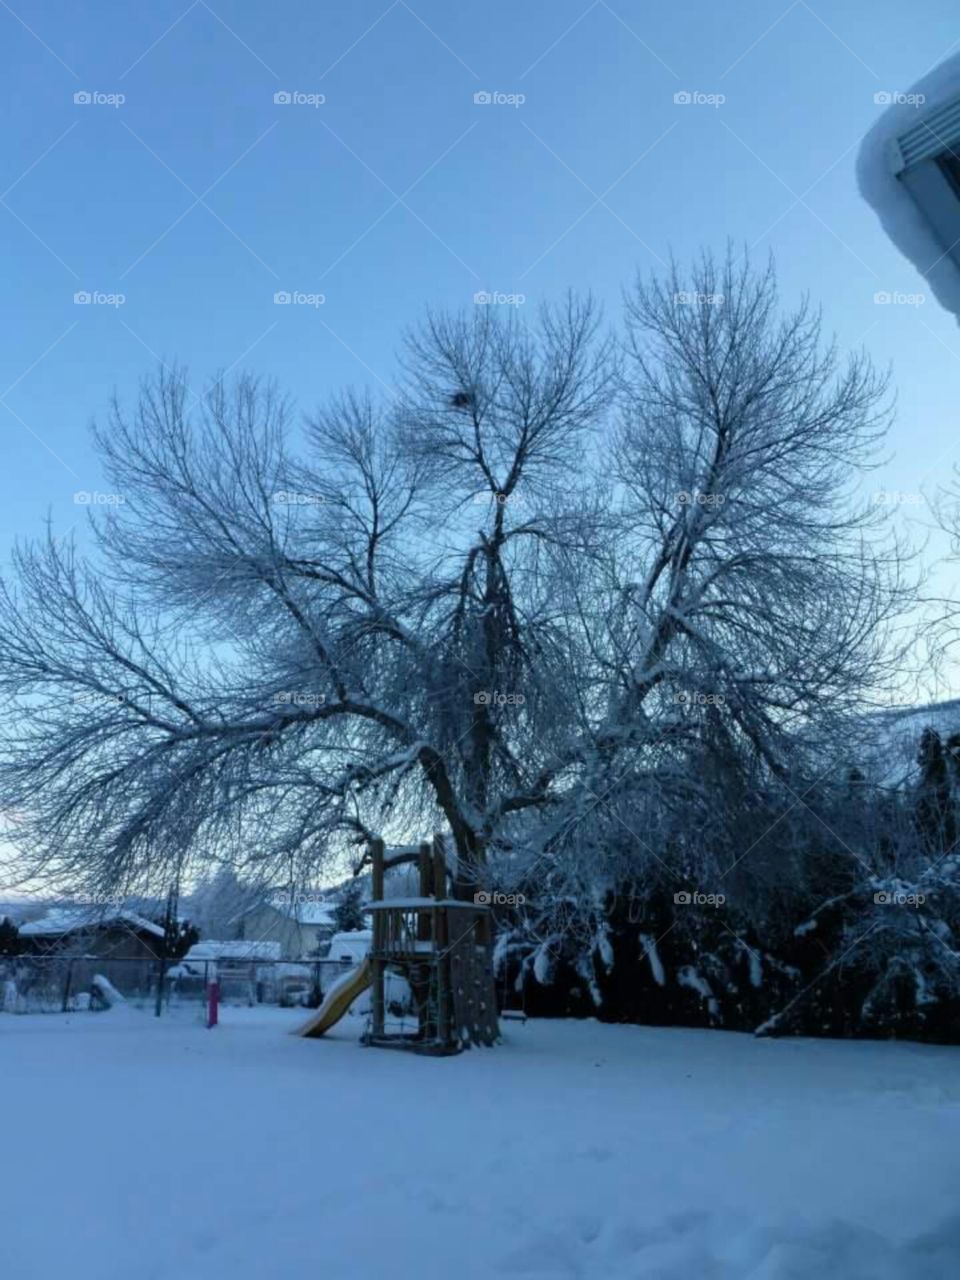 Backyard tree fort in the winter when the grandfather green ashe tree is a skeleton.